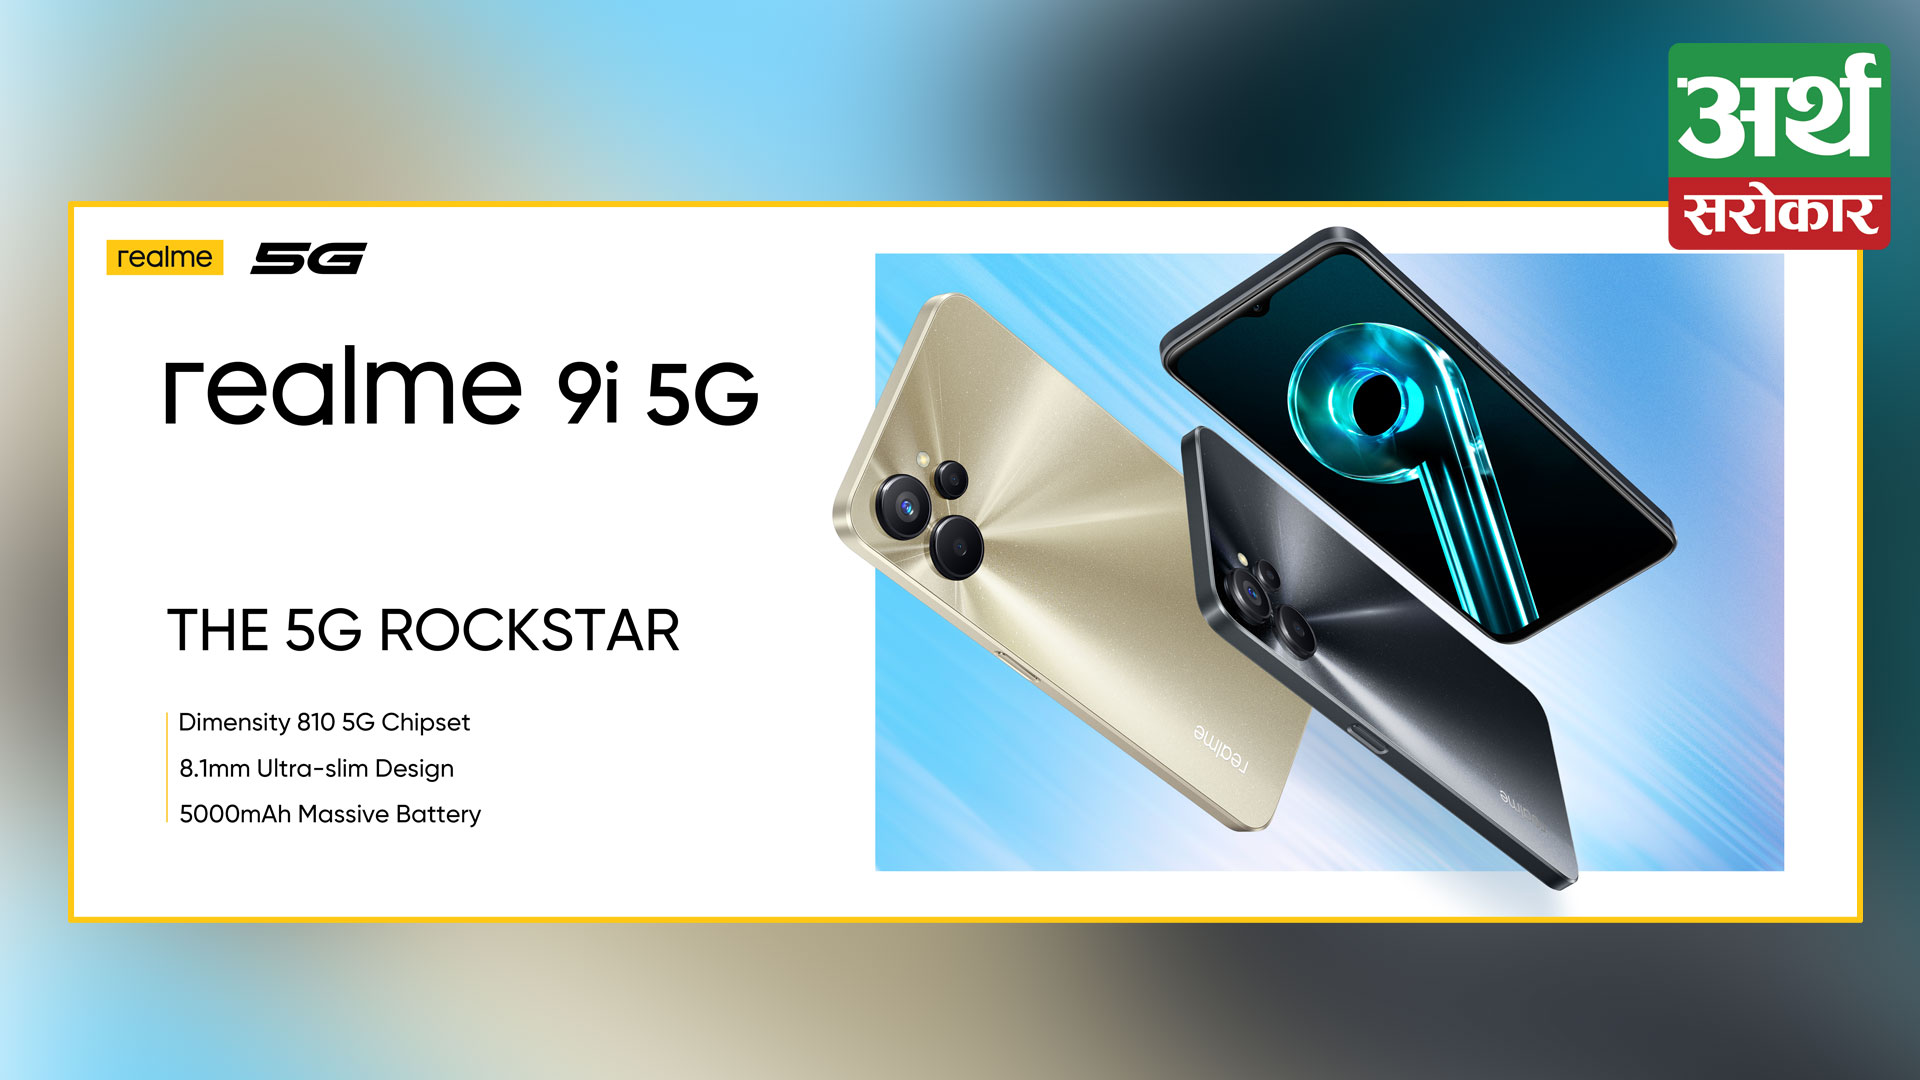 Realme unveils its most affordable 5G device, the realme 9i 5G featuring MediaTek Dimensity 810